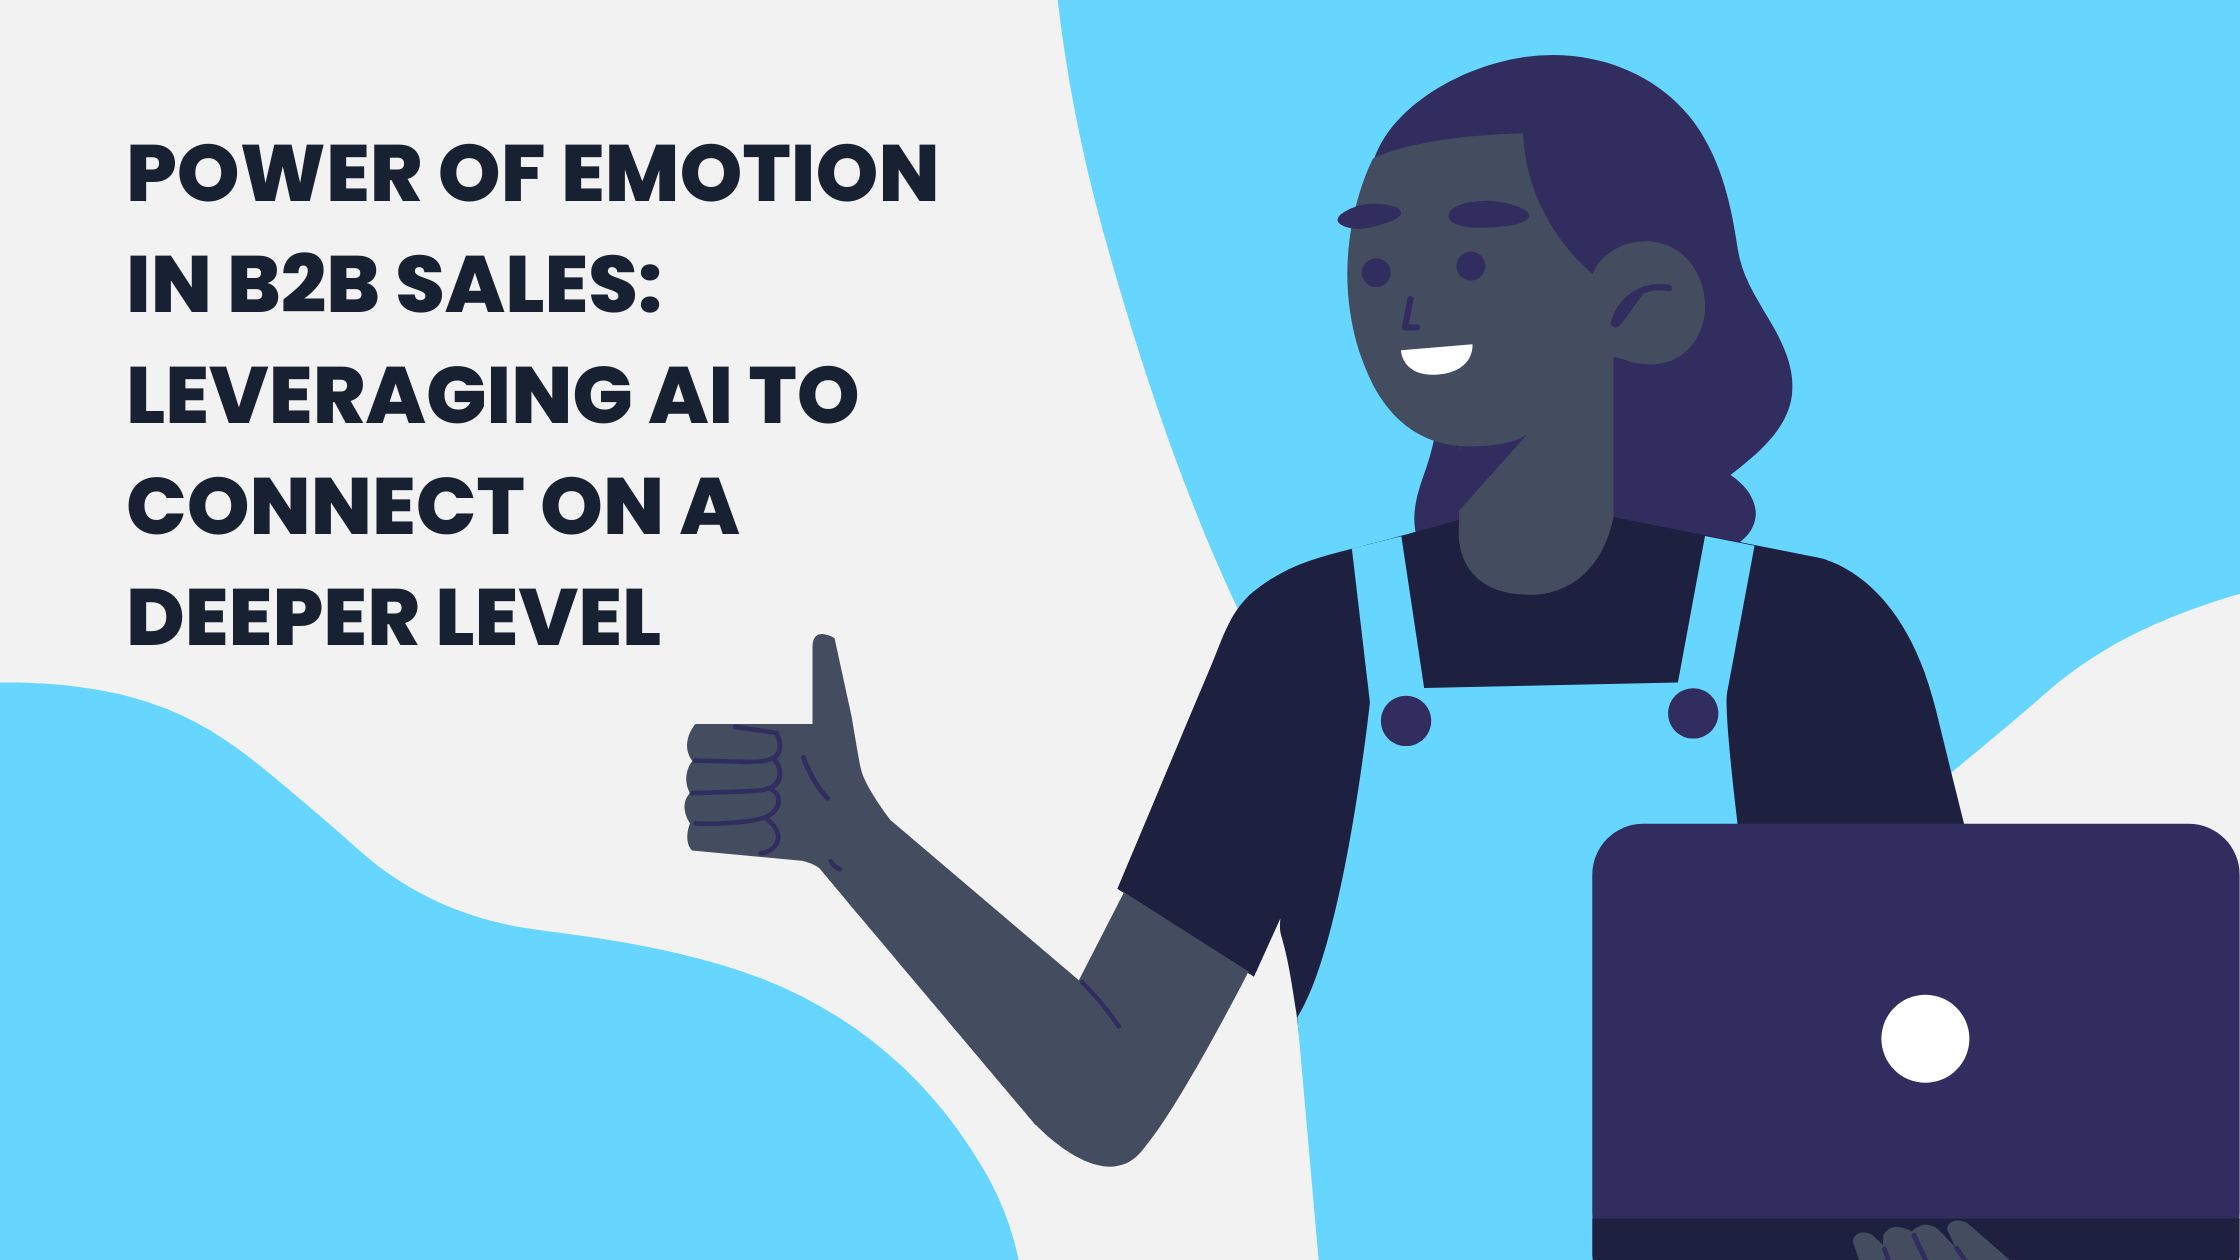 Power of Emotion in B2B Sales: Leveraging AI to Connect on a Deeper Level